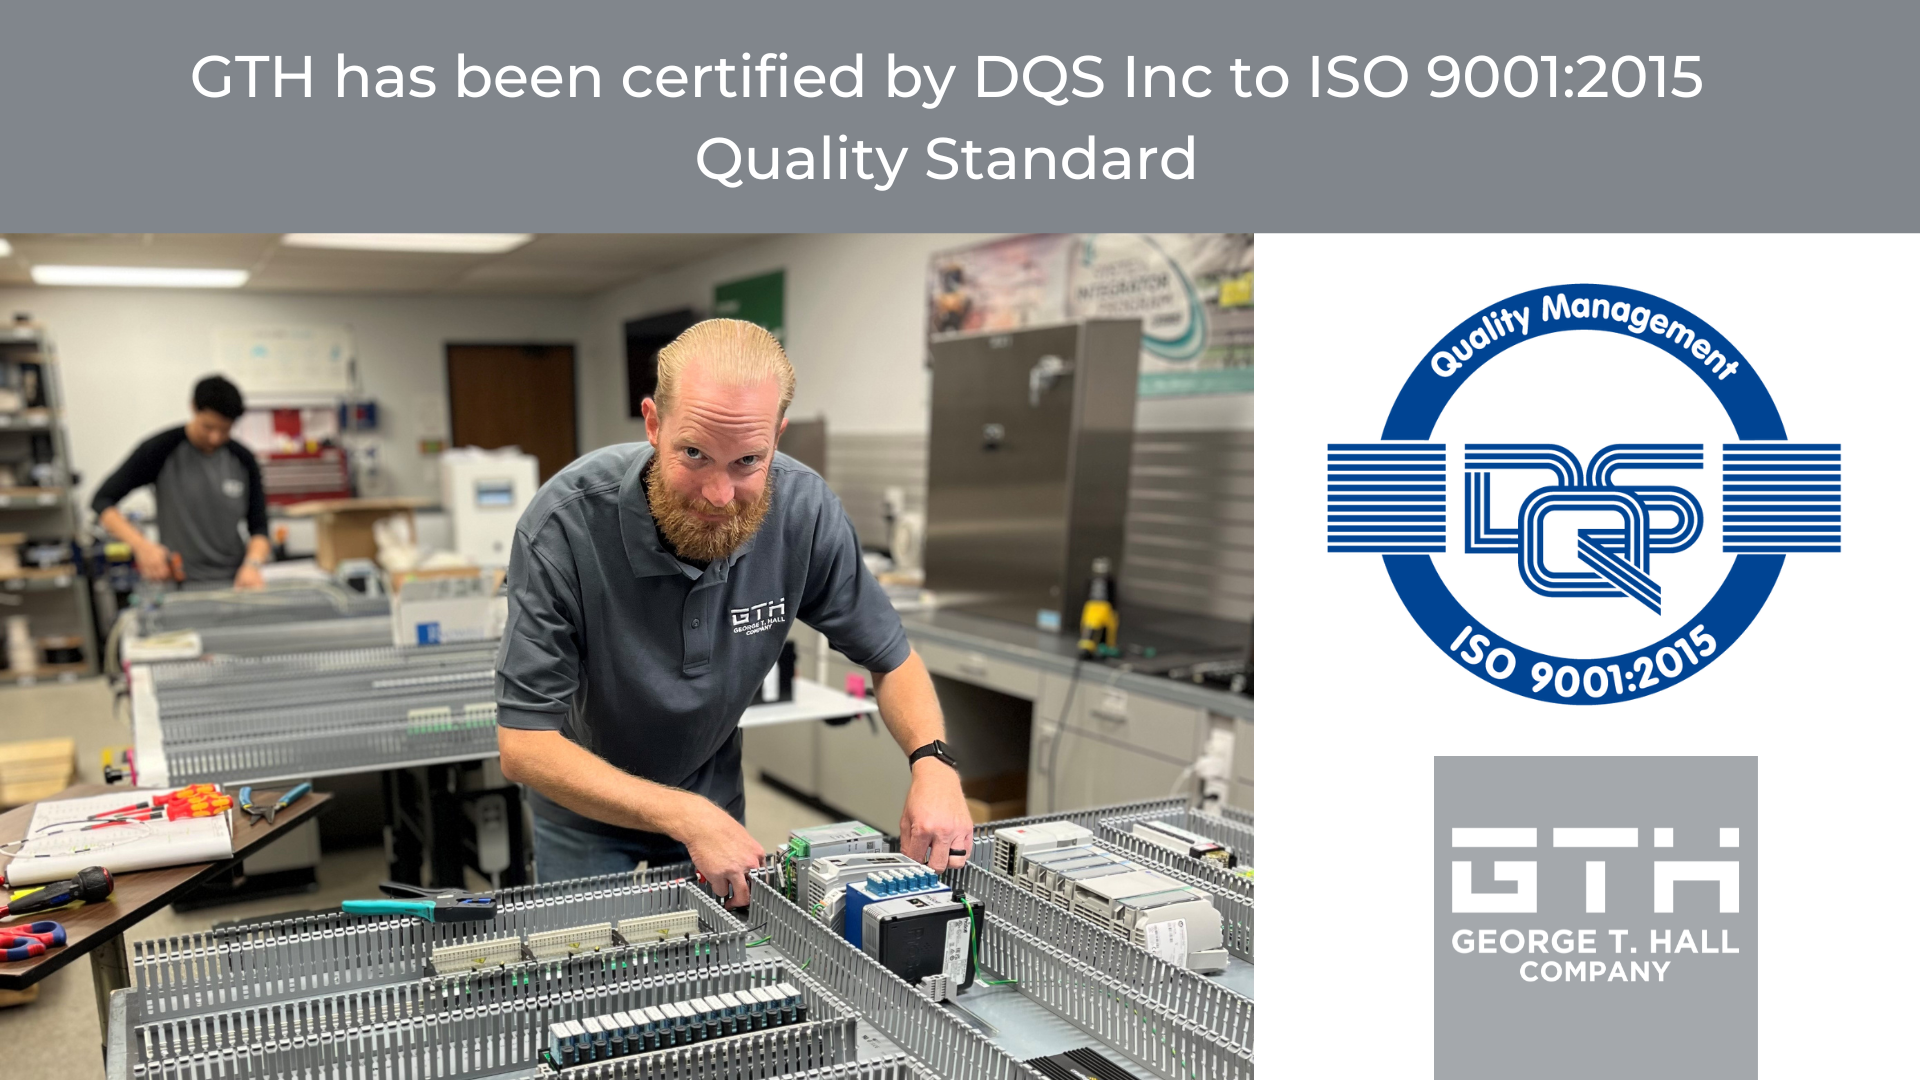 George T. Hall Company (GTH) has been certified by DQS Inc to ISO 9001:2015 Quality Standard